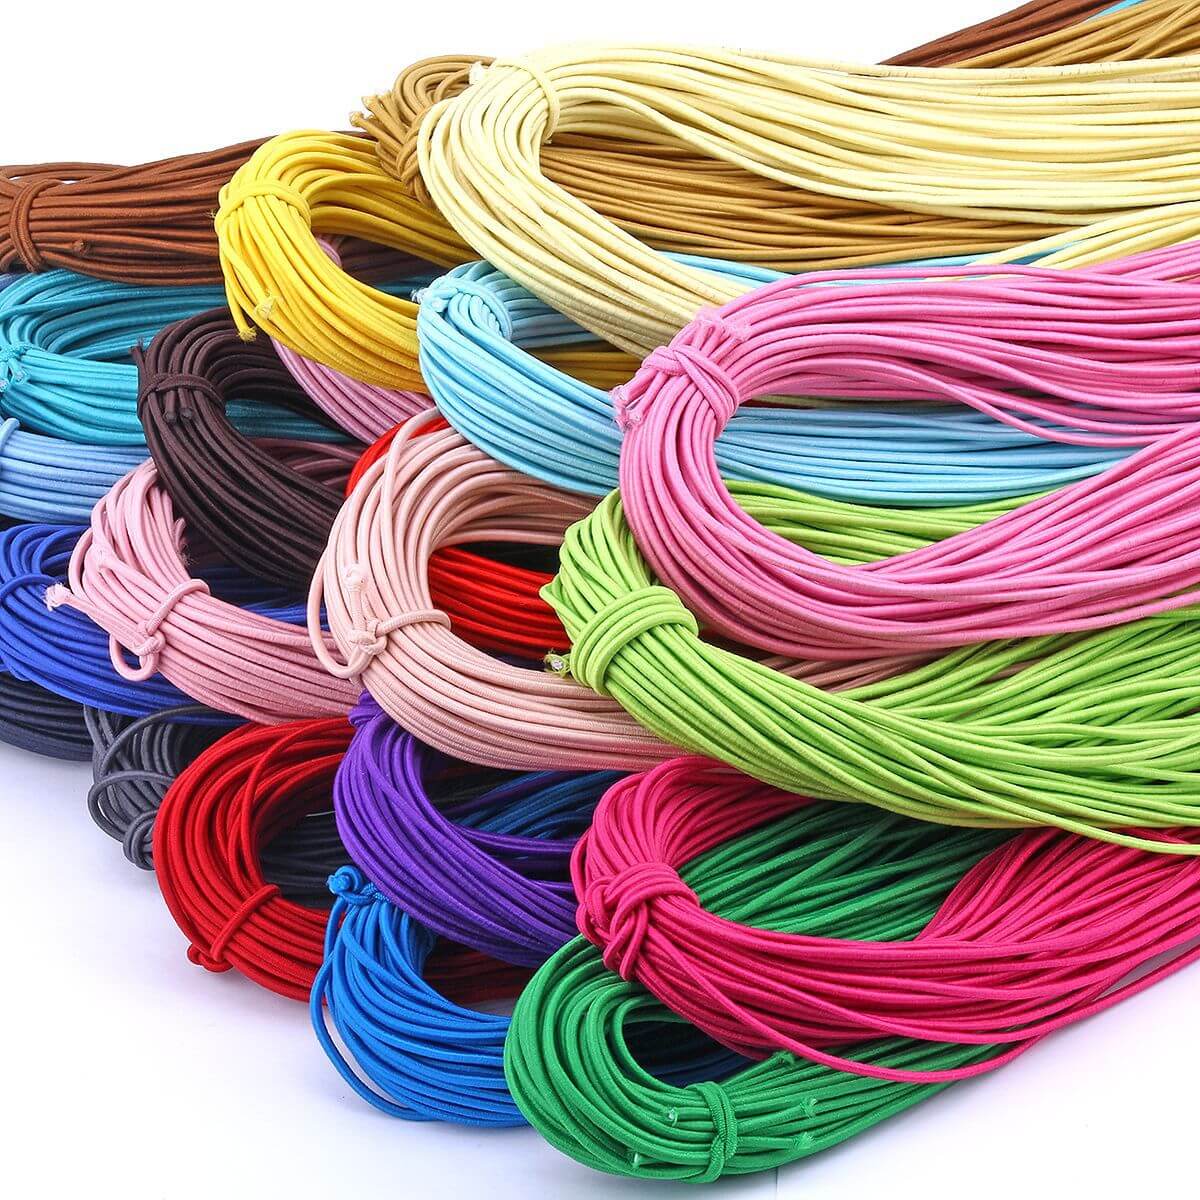 MingRibbon ready stock 2mm wide colorful elastic cord 24 colors